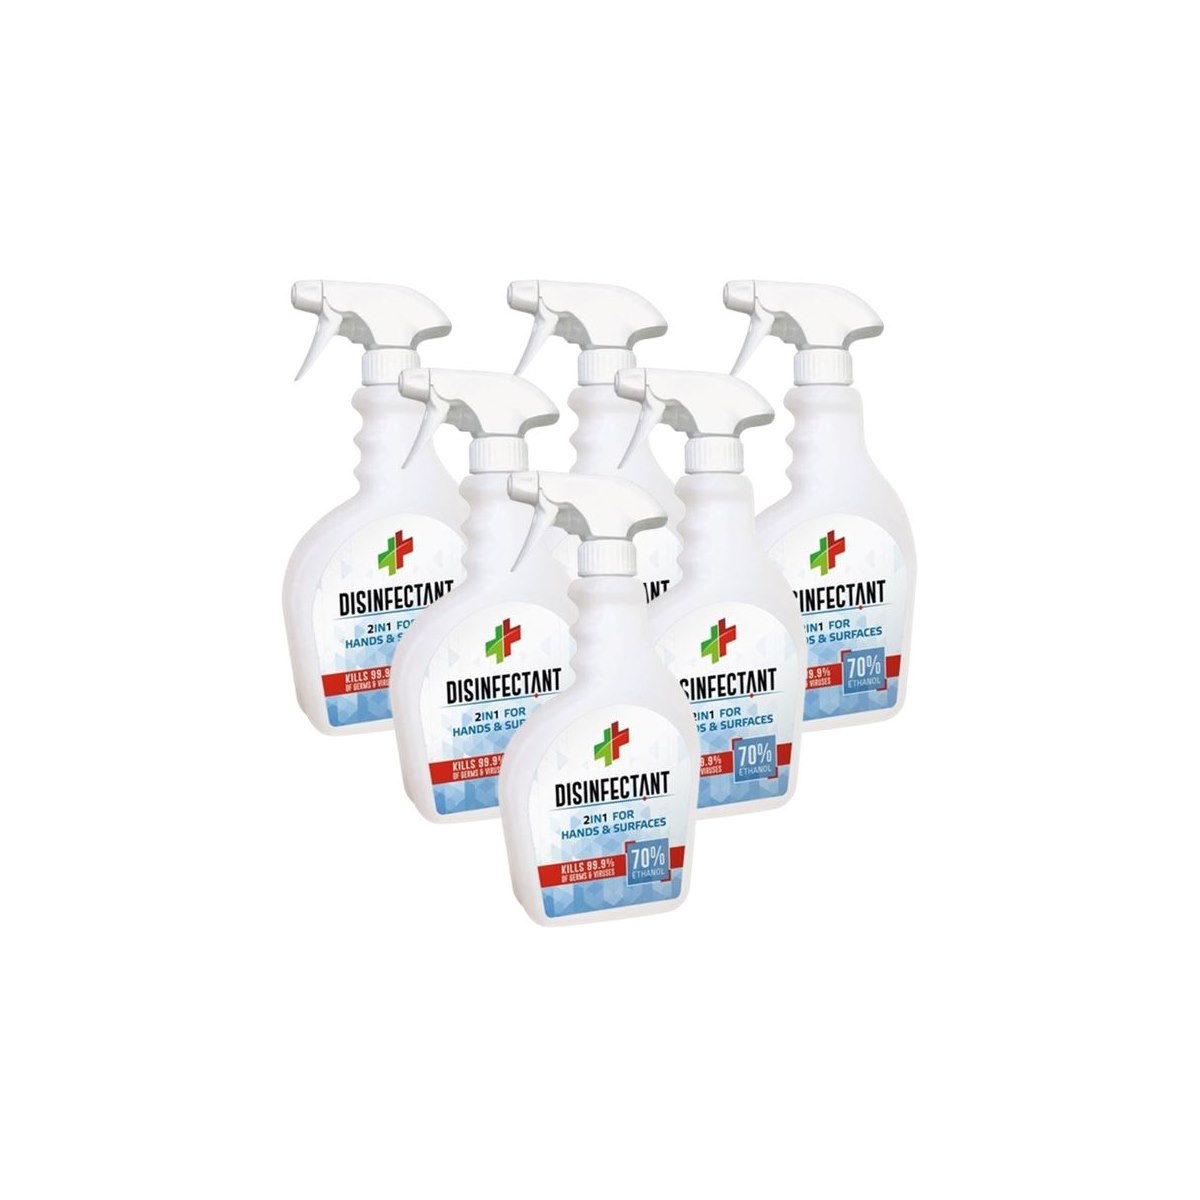 Case of 6 x Tri-Bio 2 in 1 Disinfectant for Hands and Hard Surfaces Spray 420ml